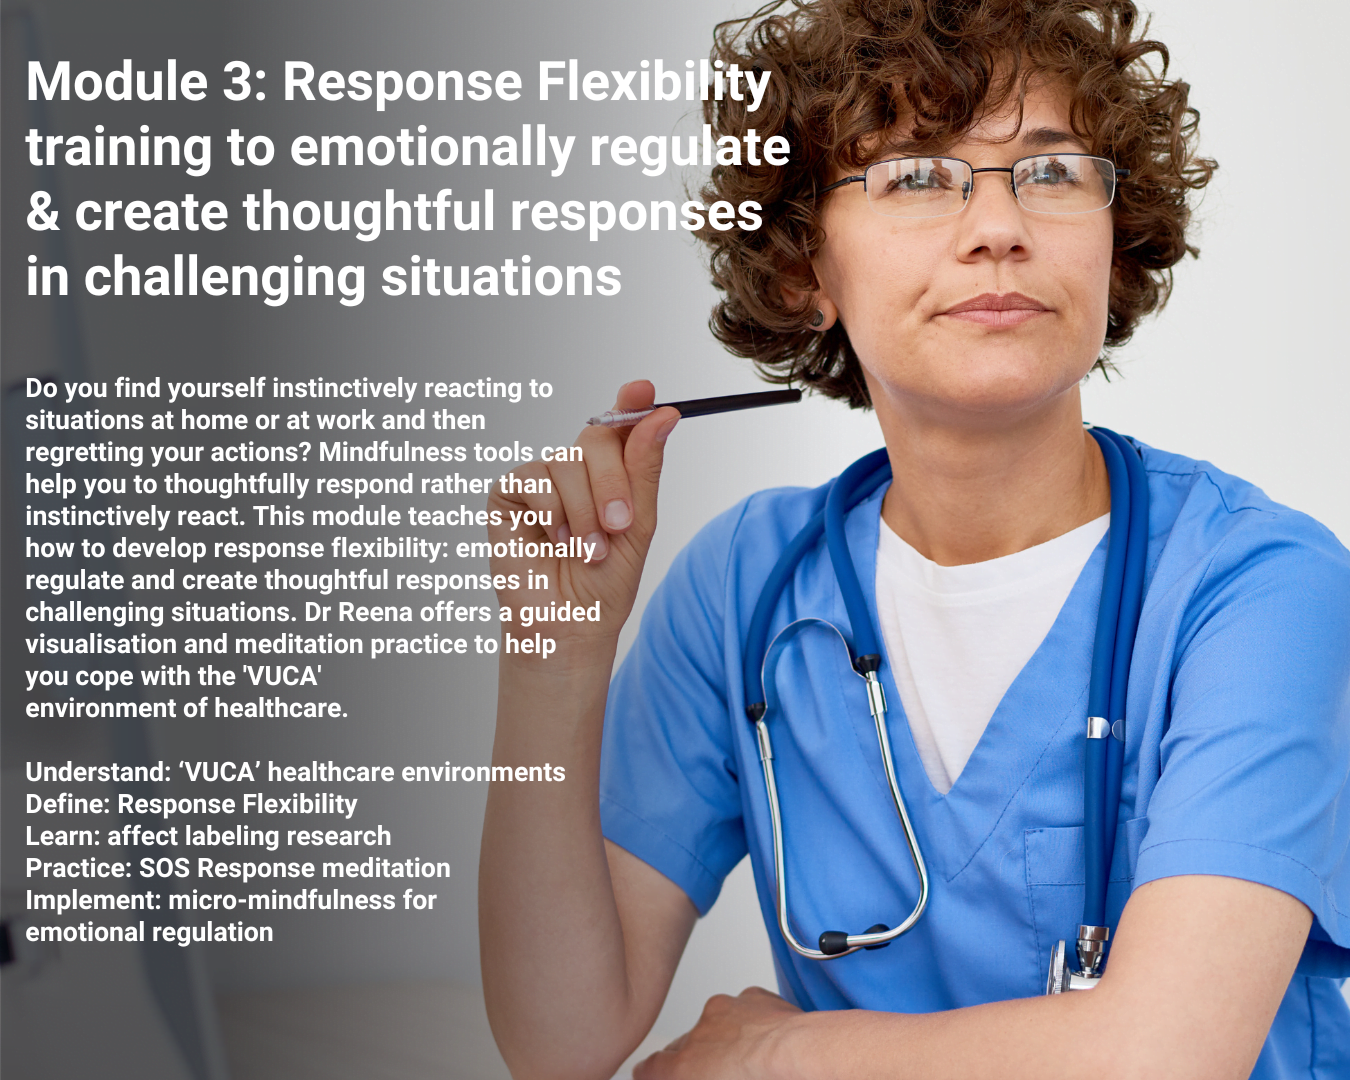 Module 3: Response Flexibility training to emotionally regulate & create thoughtful responses in challenging situations.